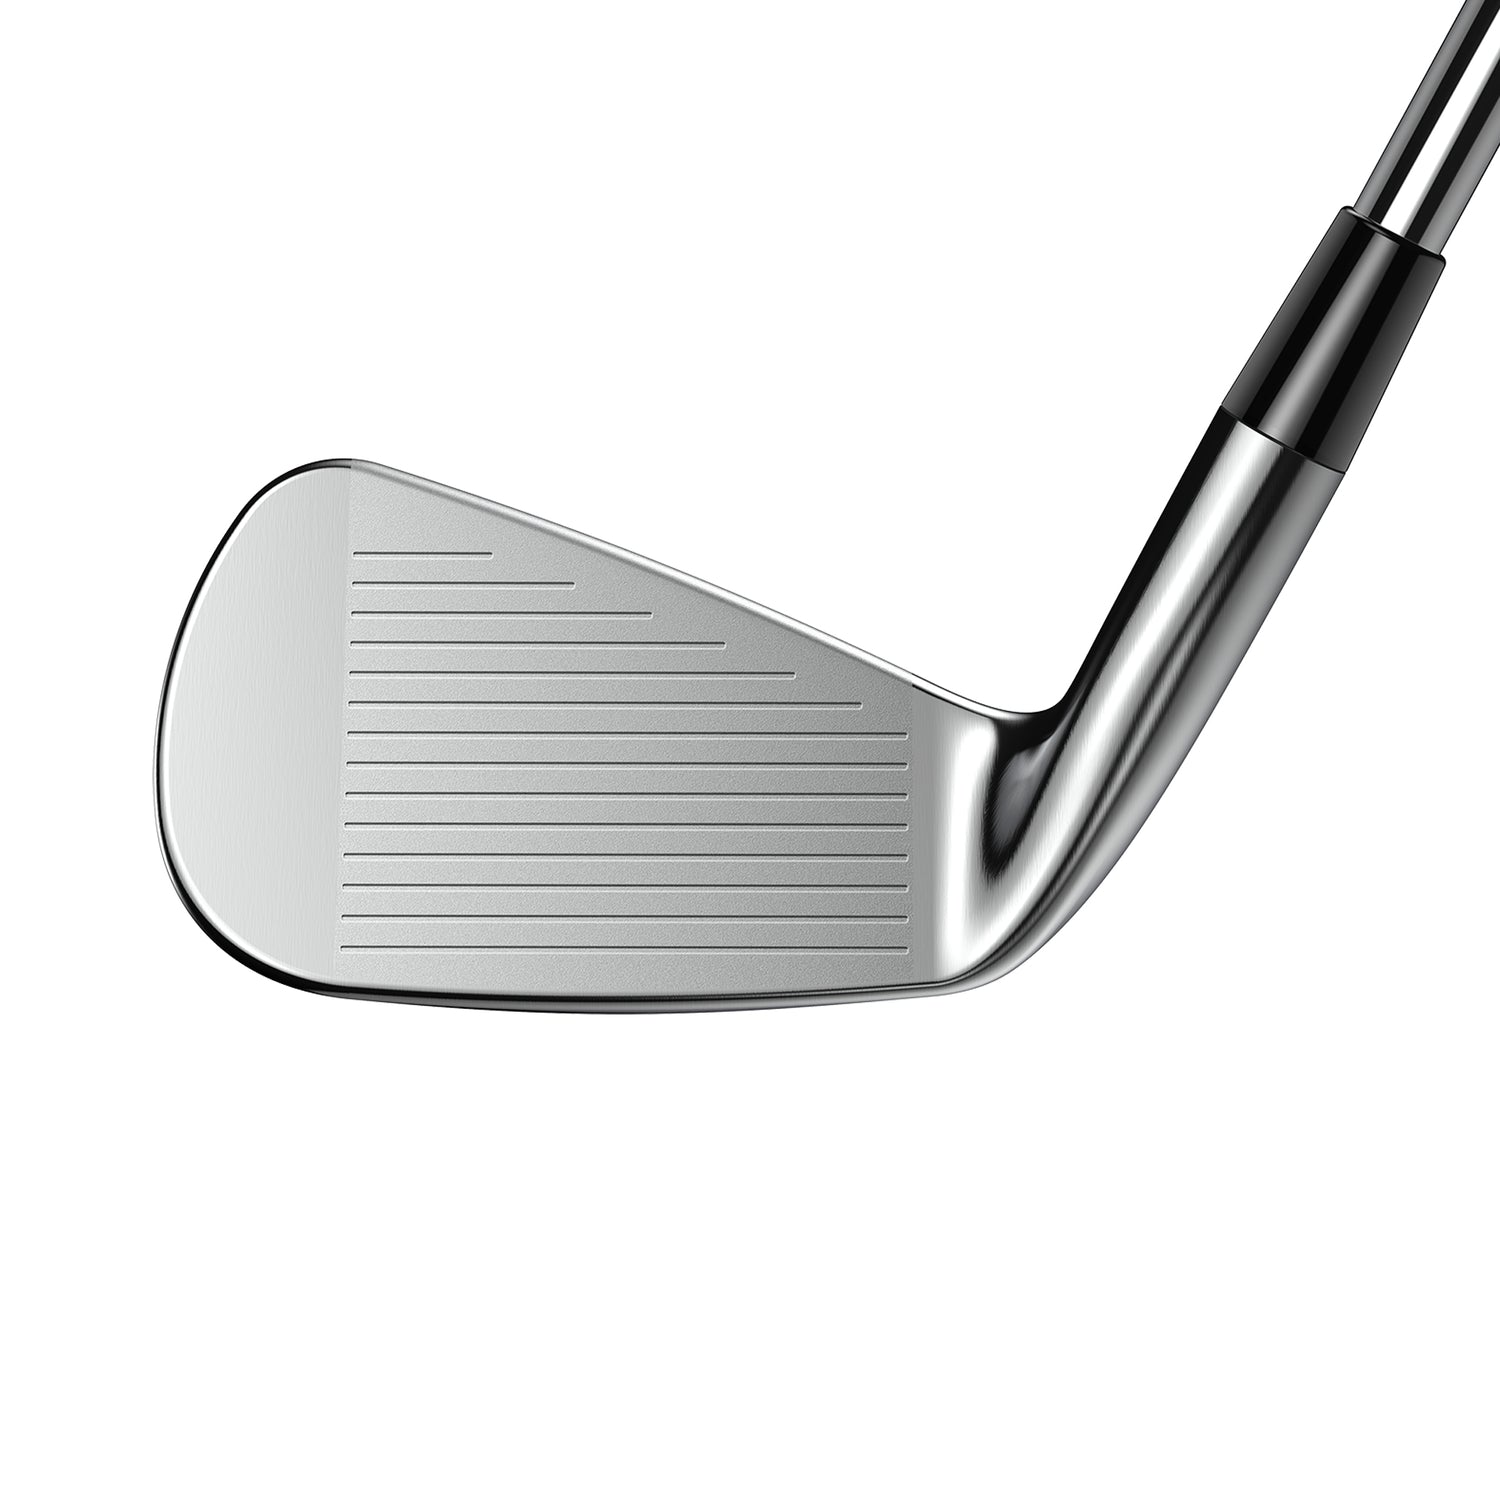 KING Forged Tec ONE Length Irons – COBRA Golf